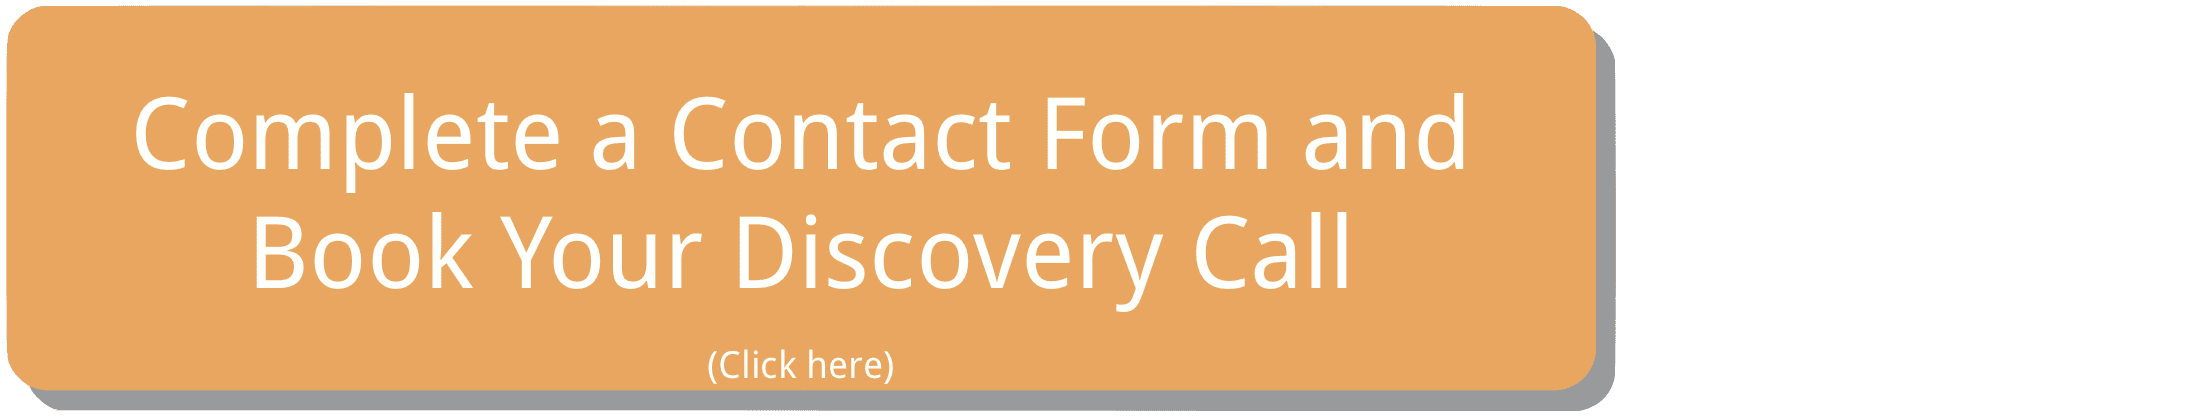 Step 1. Complete a contact form and book your discovery call.